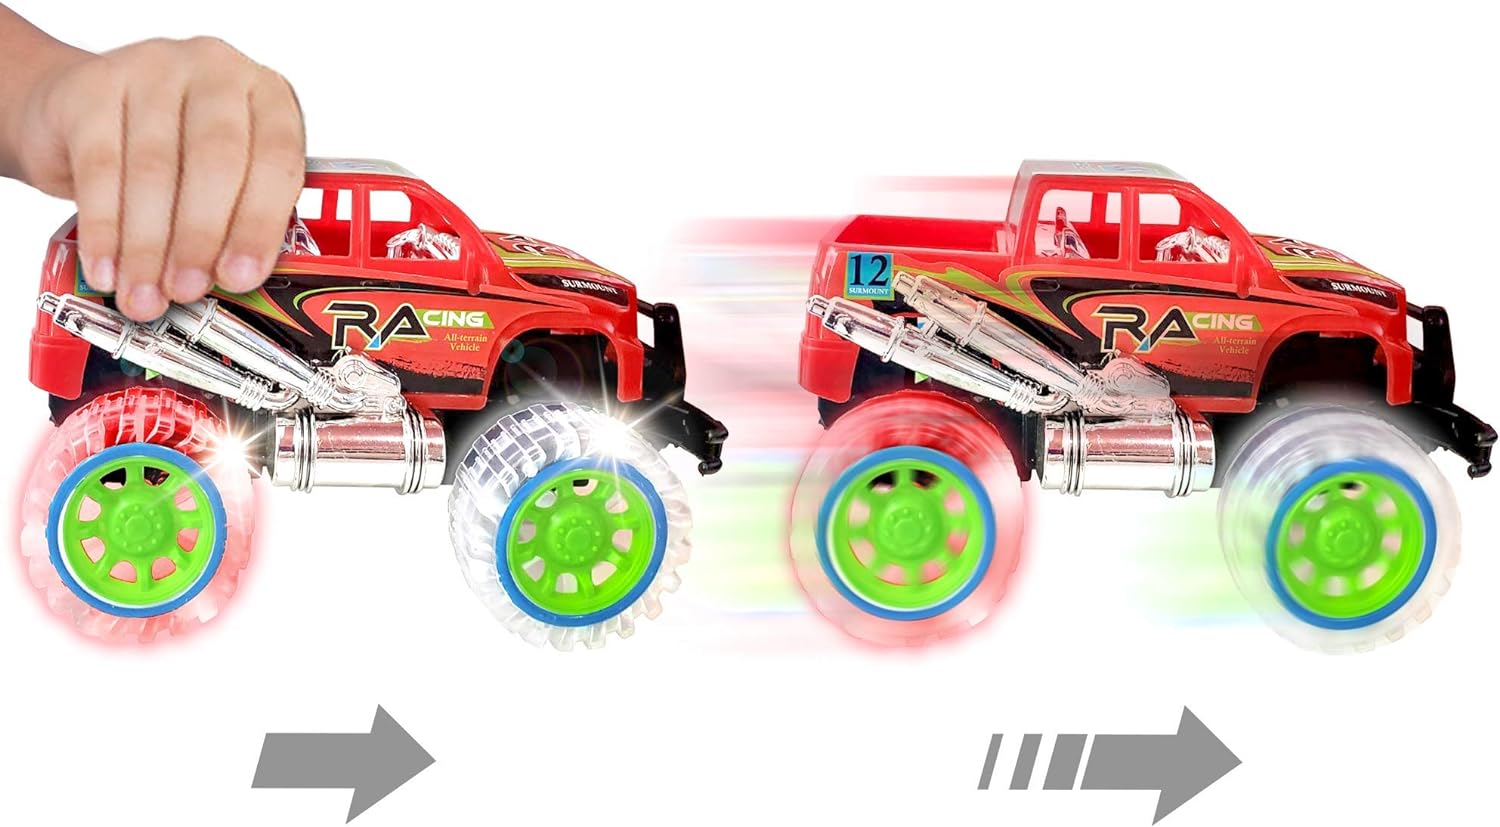 ArtCreativity Light-Up Red Monster Truck with Sounds, 9 Inch Monster Truck with Flashing Wheels and Friction Motor, Push n Go Toy Car, Best Birthday Gift for Boys and Girls Ages 3+